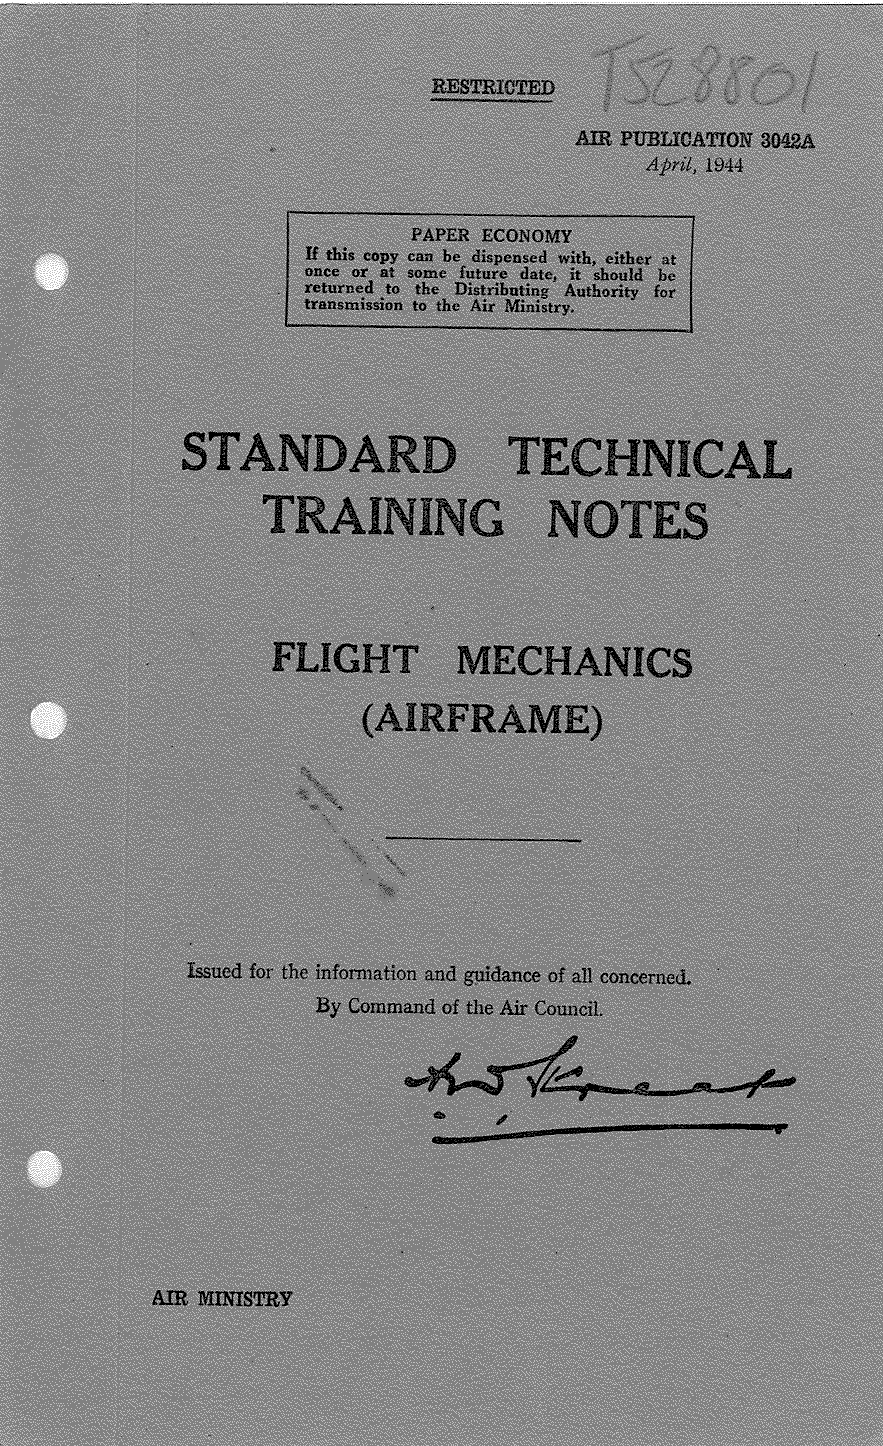 Sample page 1 from AirCorps Library document: Technical Training Notes for Airframe Flight Mechanics